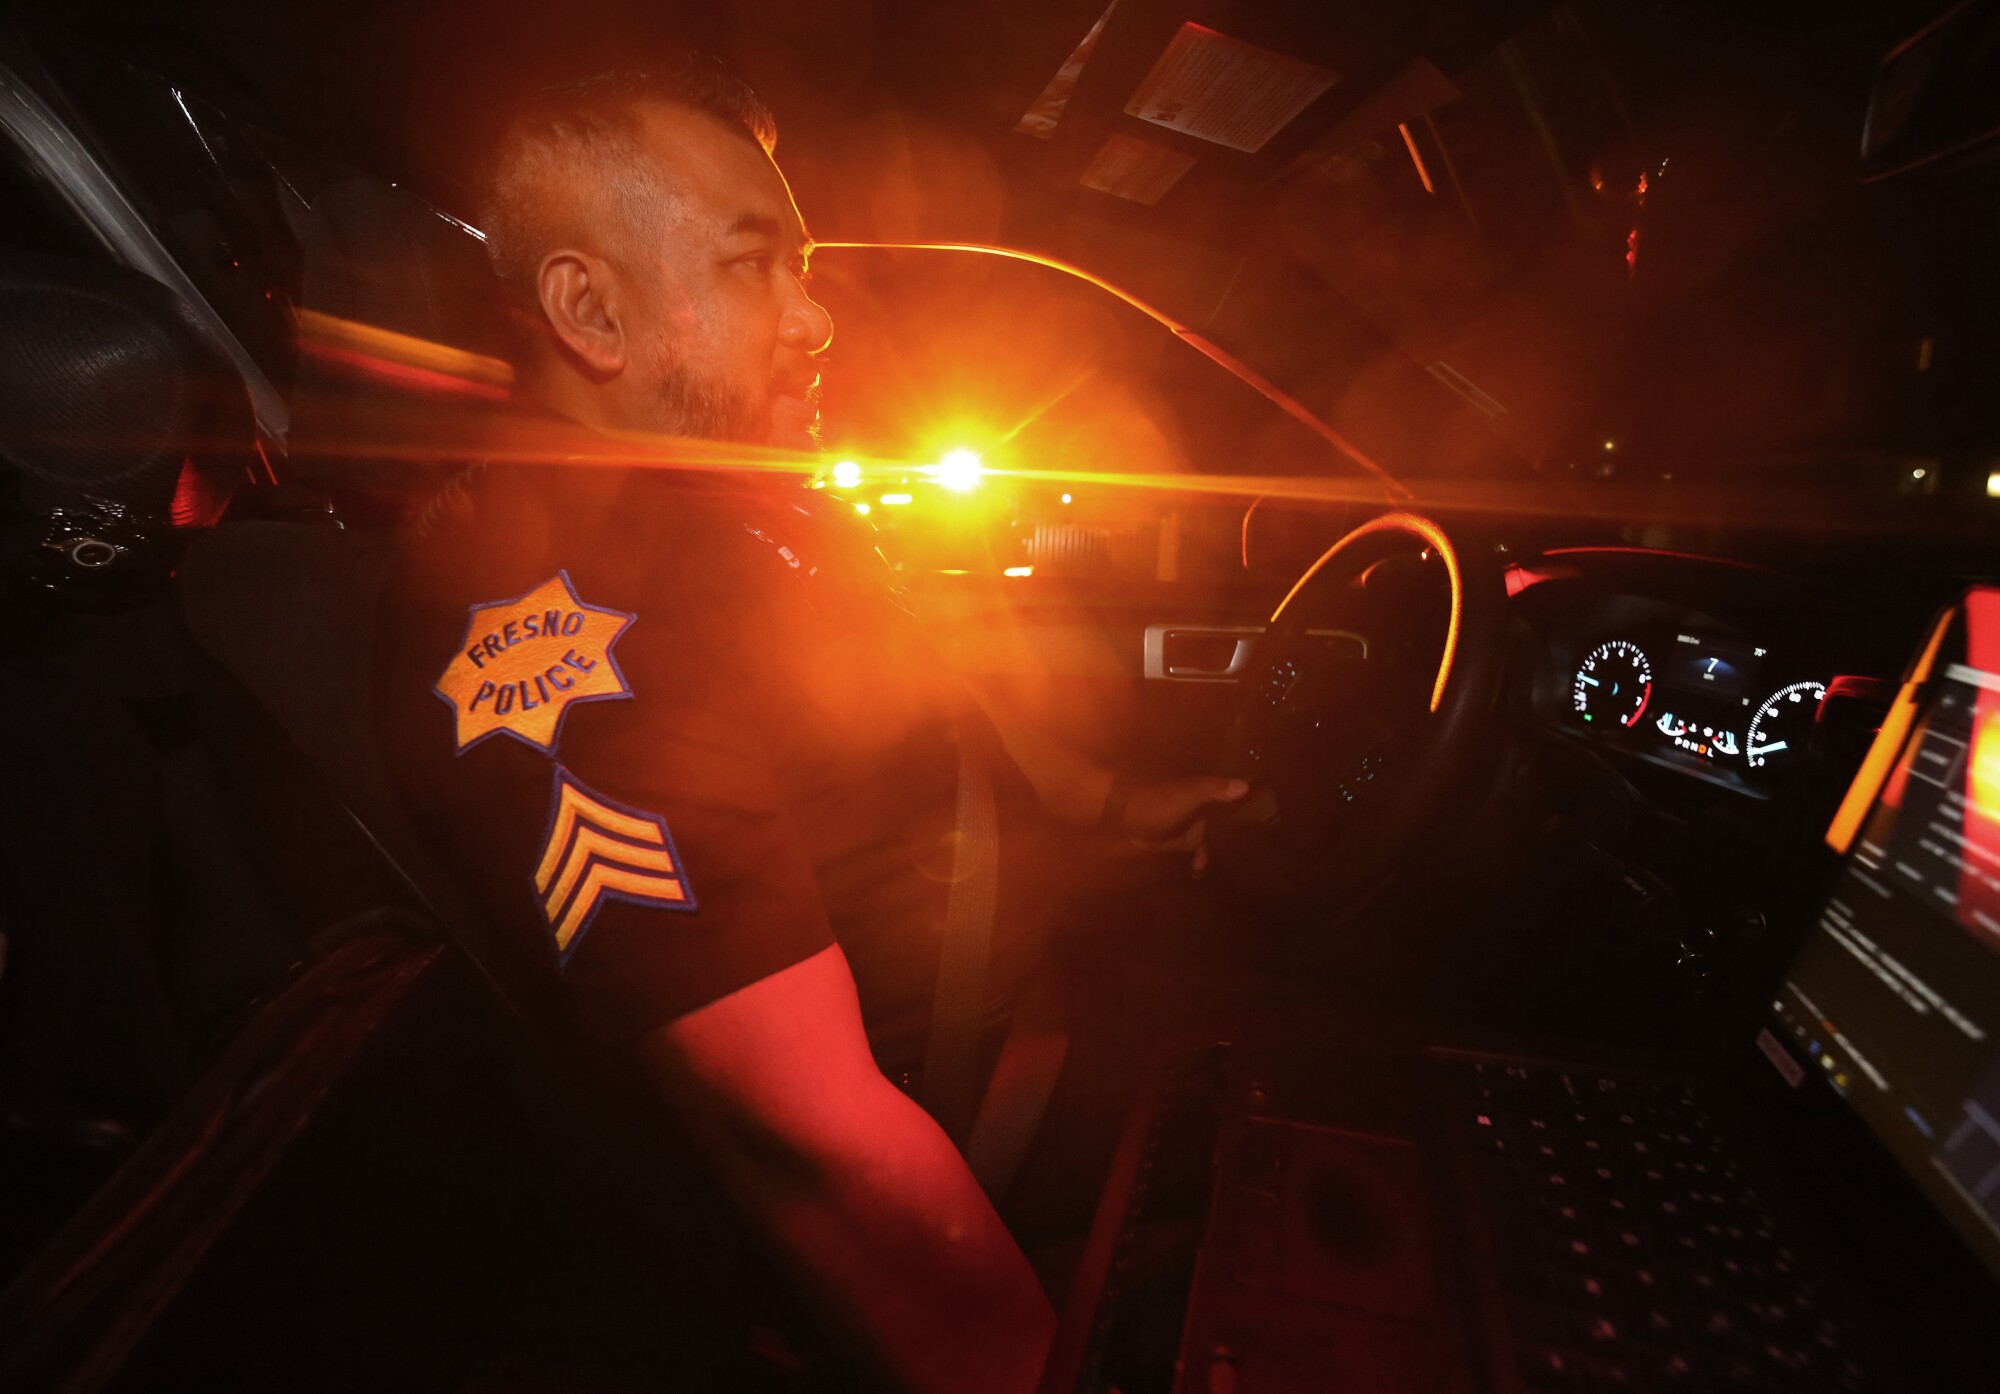 Danny Kim on duty for the Fresno Police Department.